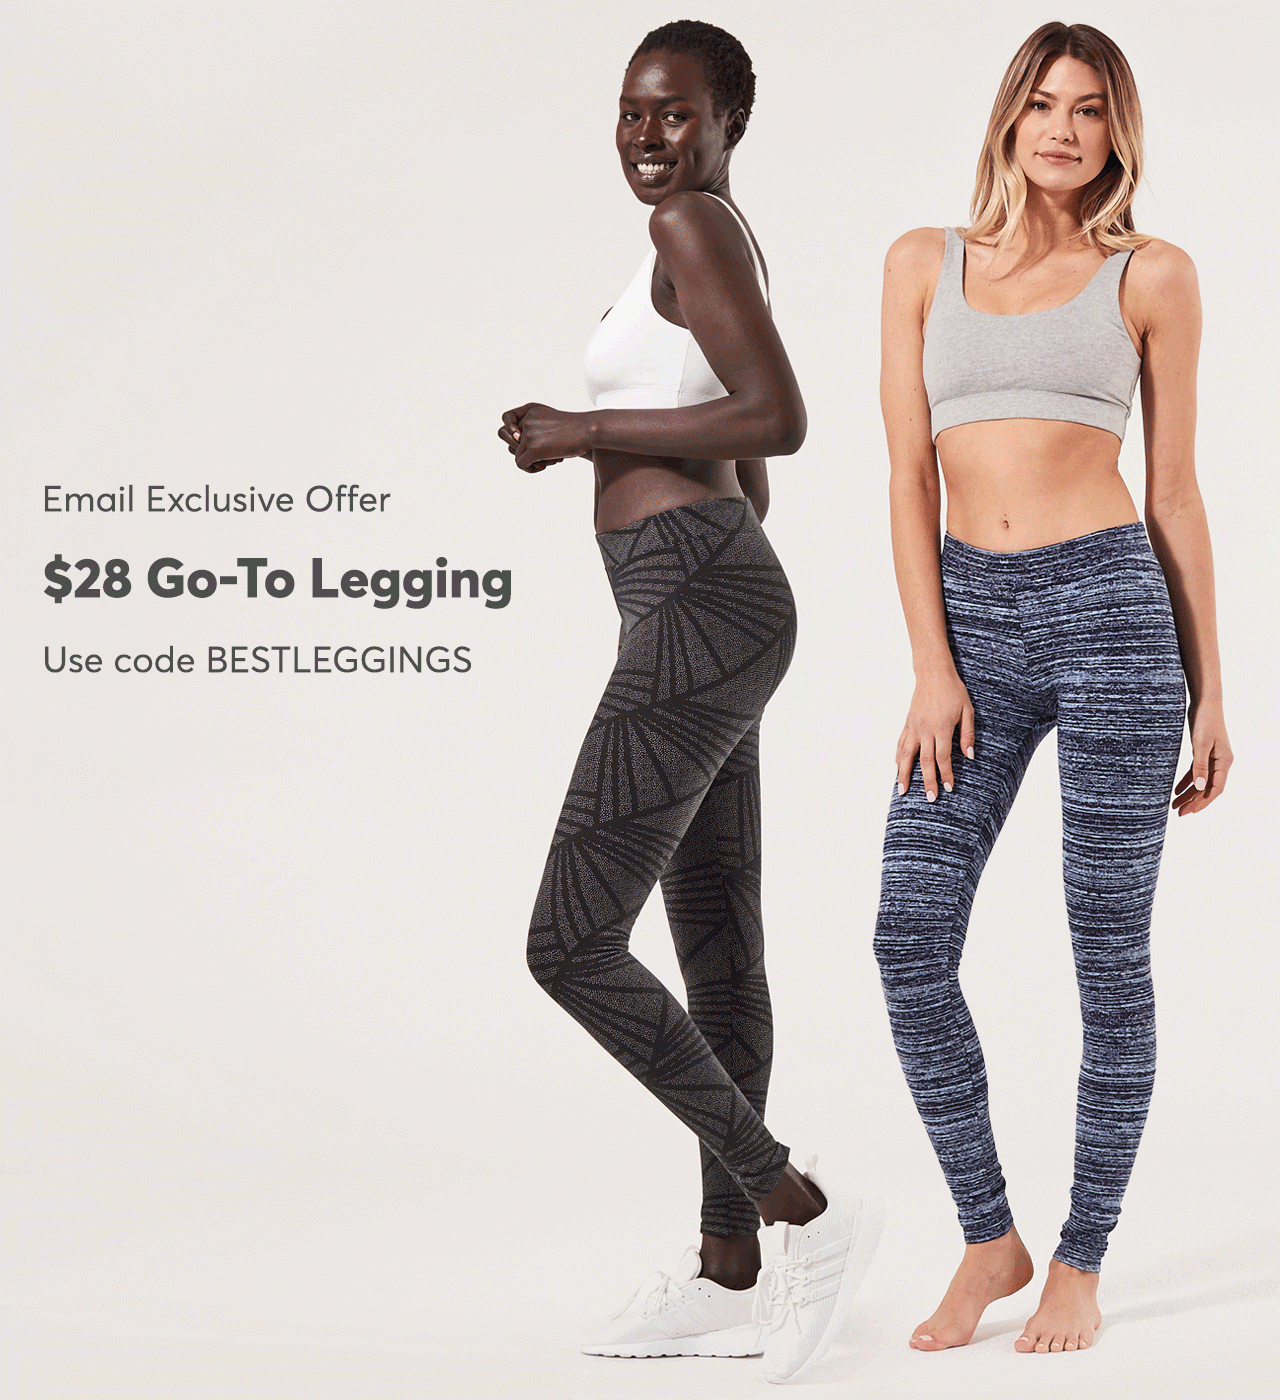 Email Exclusive Offer: $29 Go-To Leggings with code BESTLEGGINGS